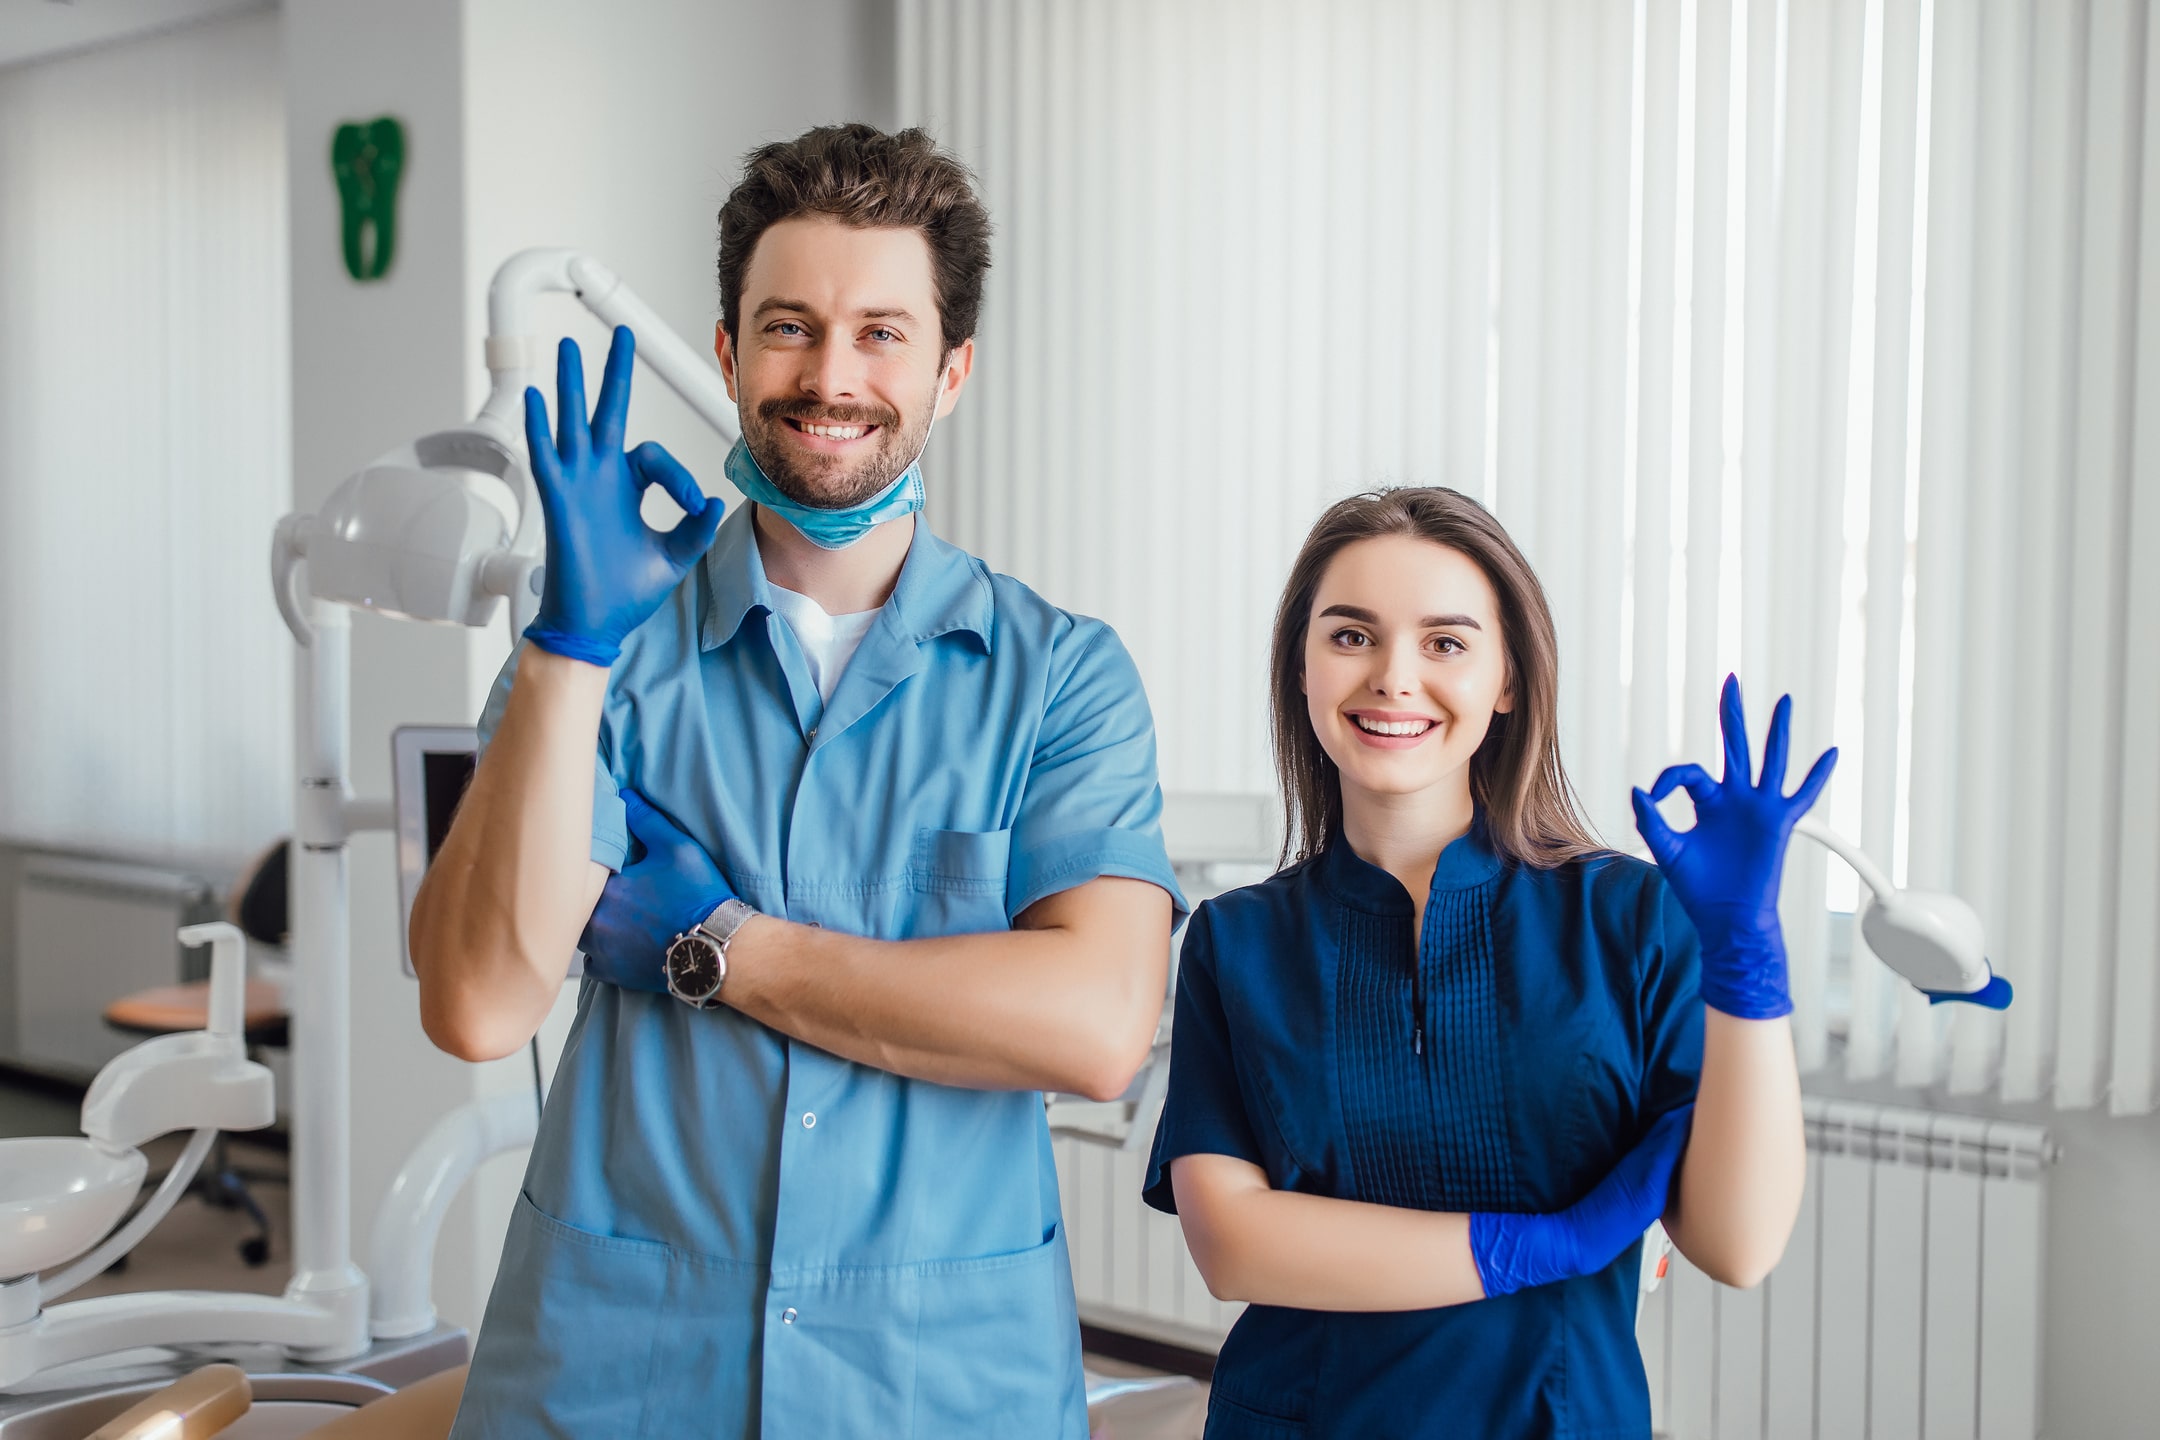 photo-smiling-dentist-standing-with-arms-crossed-with-her-colleague-showing-okay-sign-min